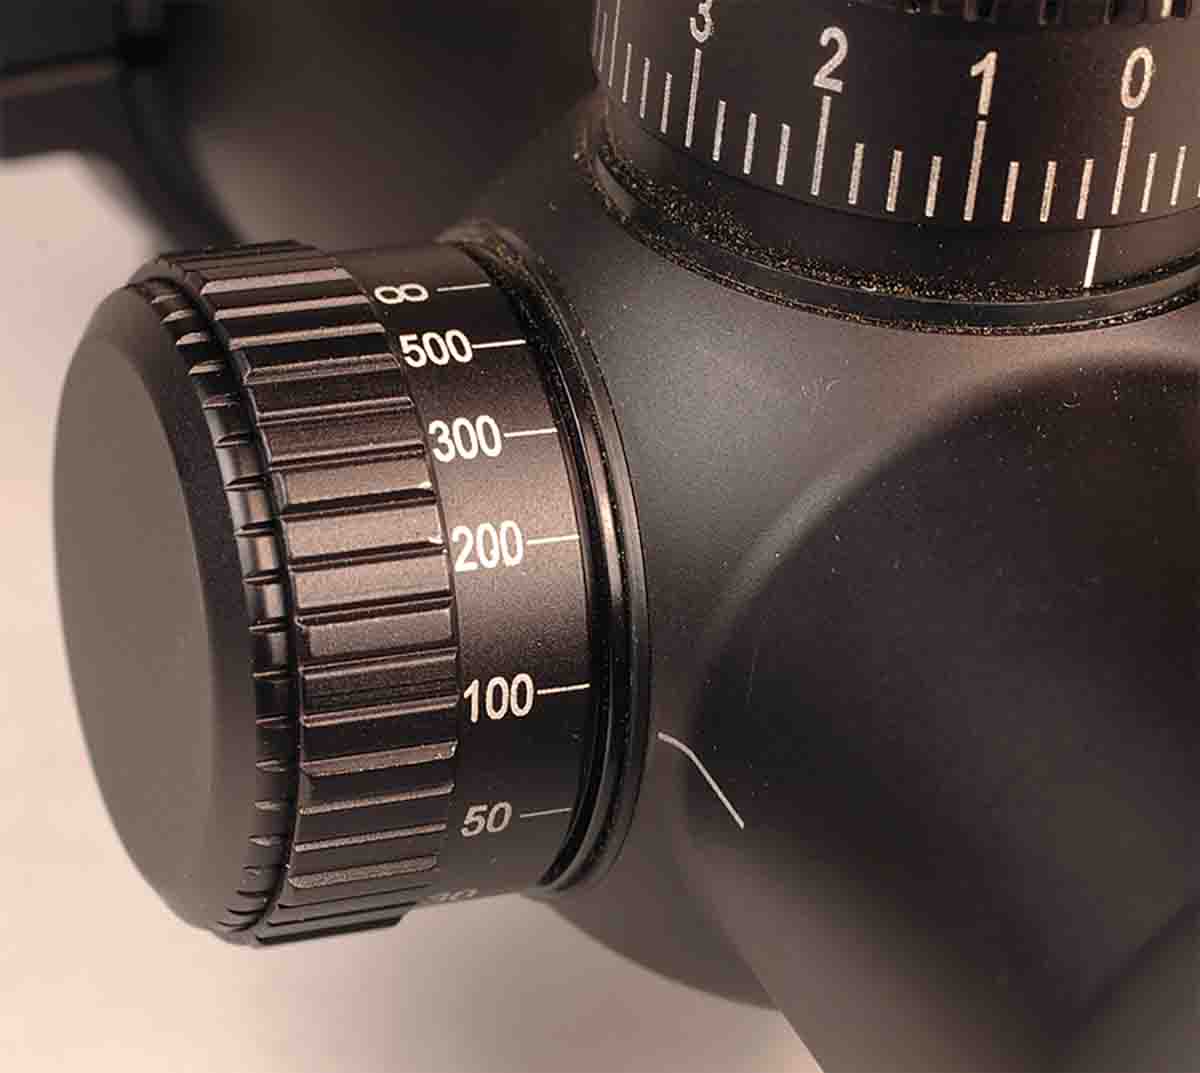 The parallax dial focuses down to 10 yards.